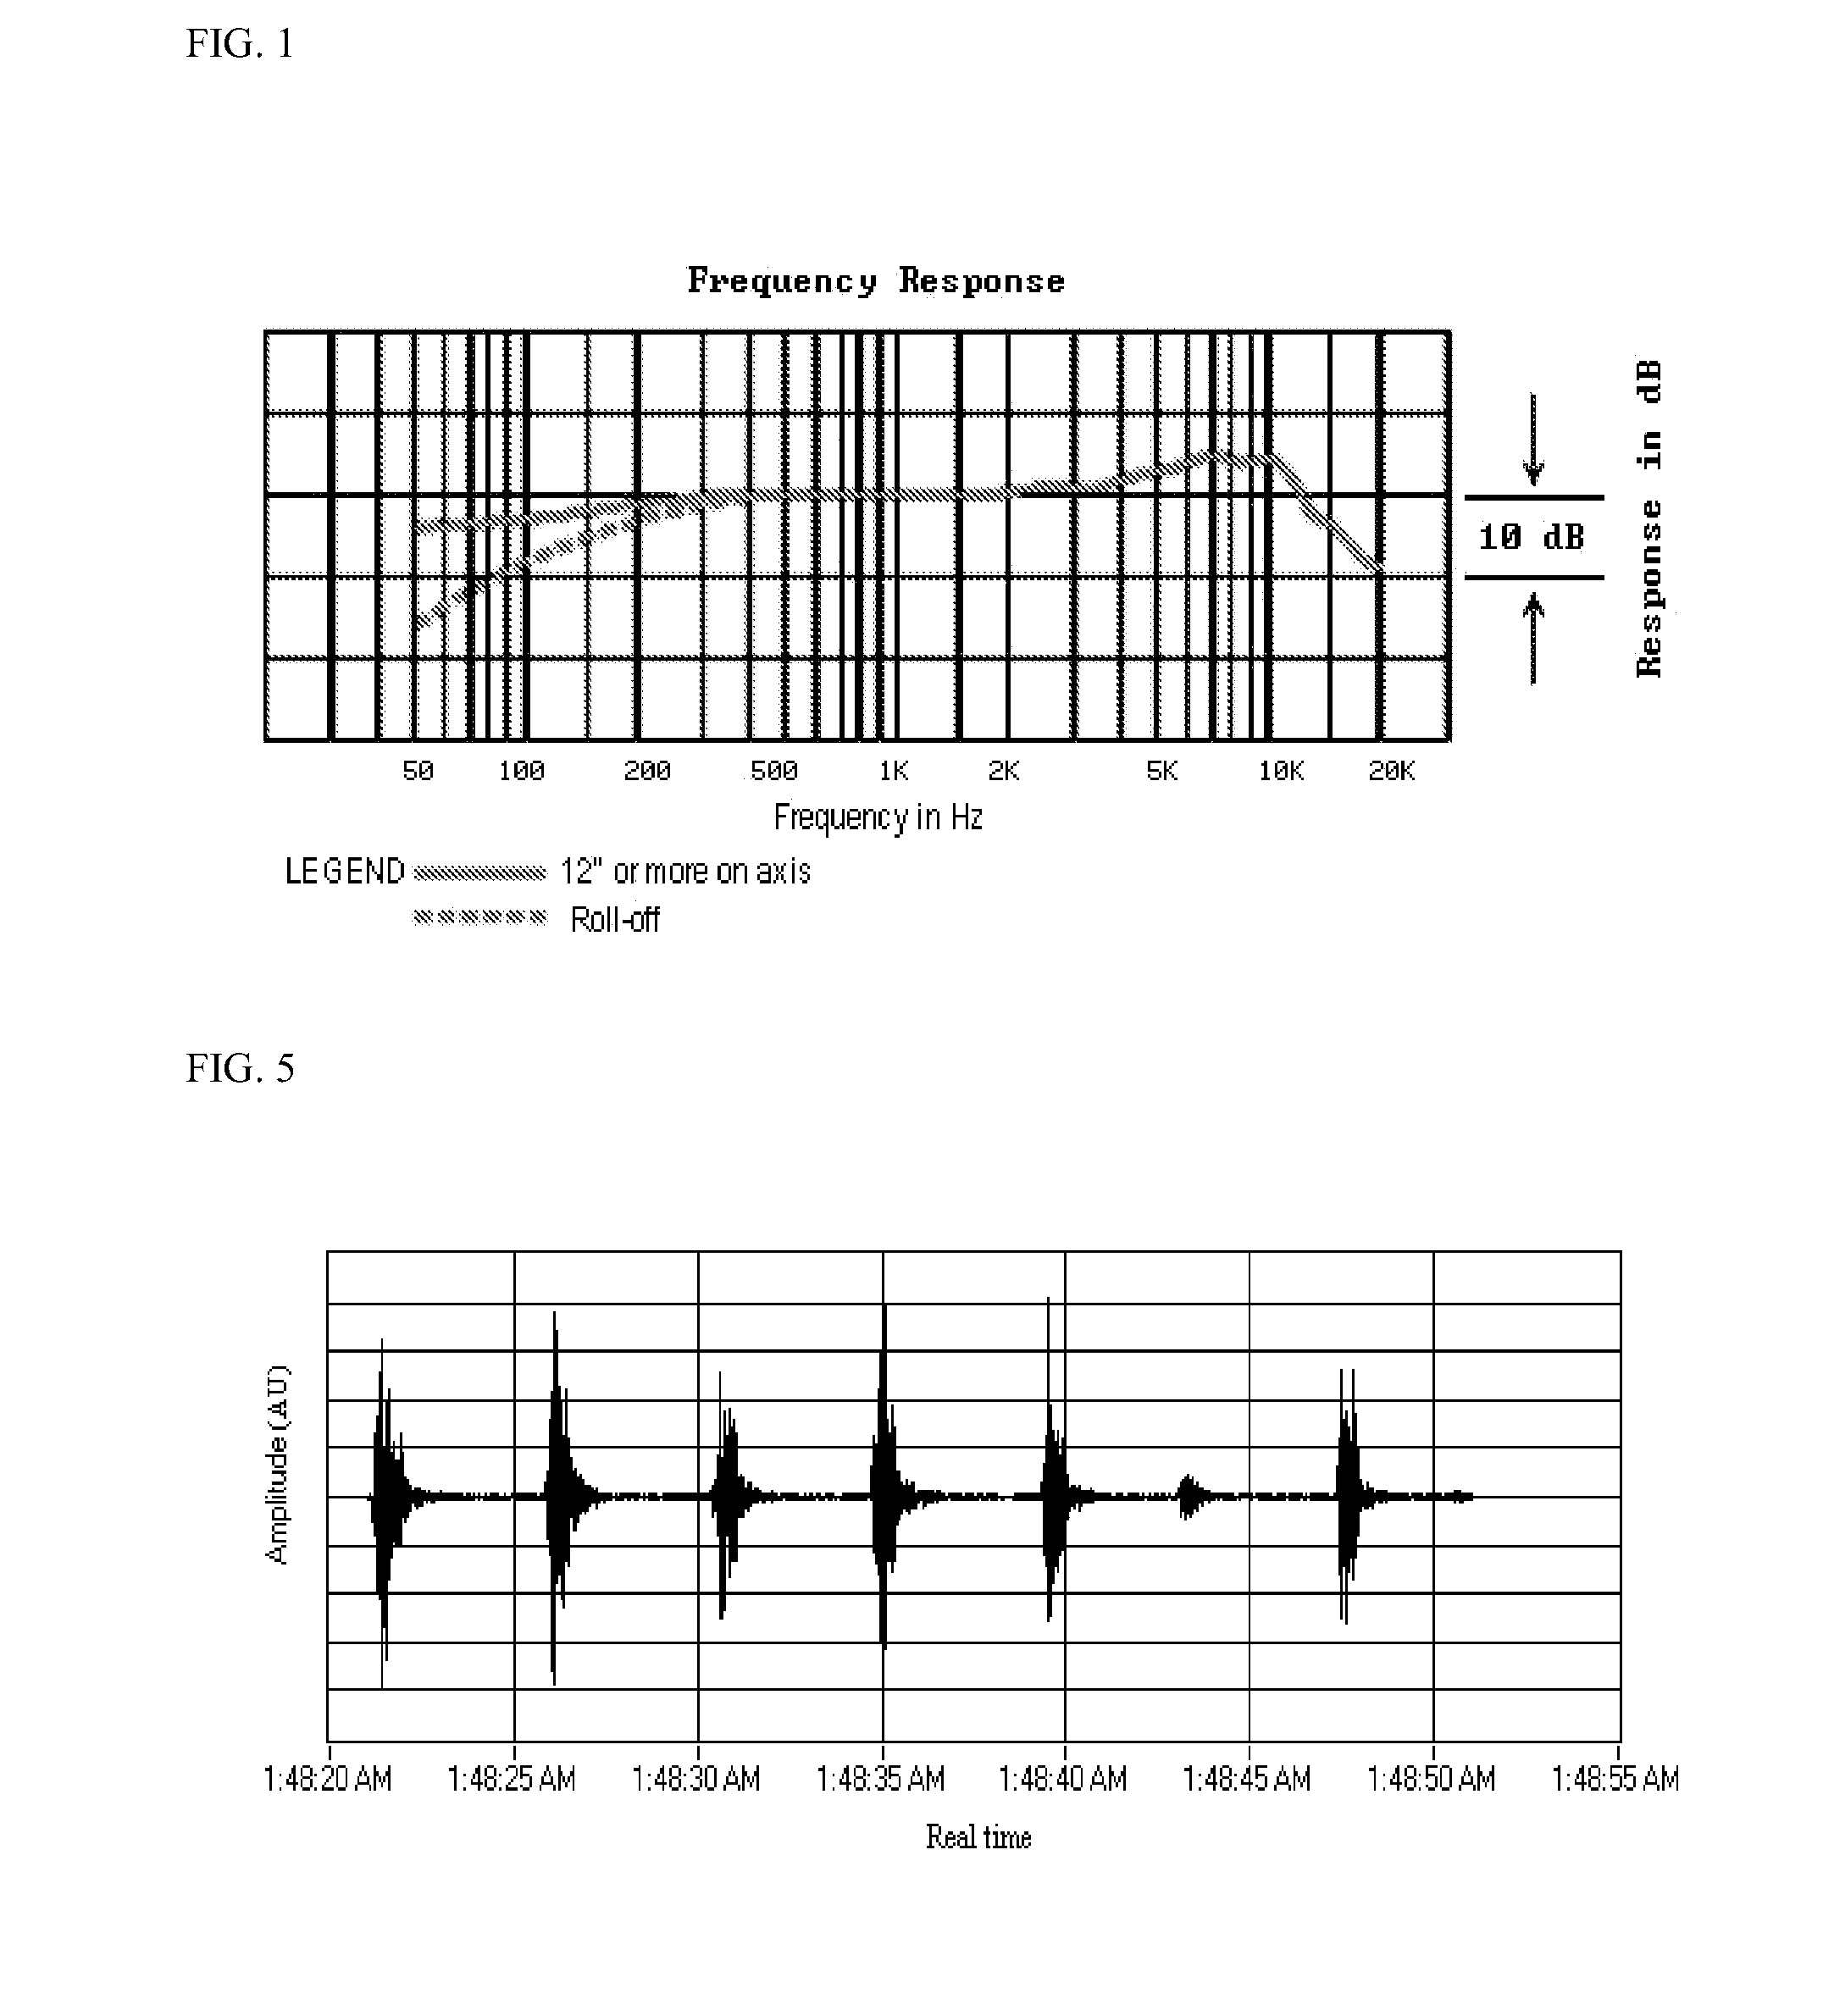 Mask and method for use in respiratory monitoring and diagnostics